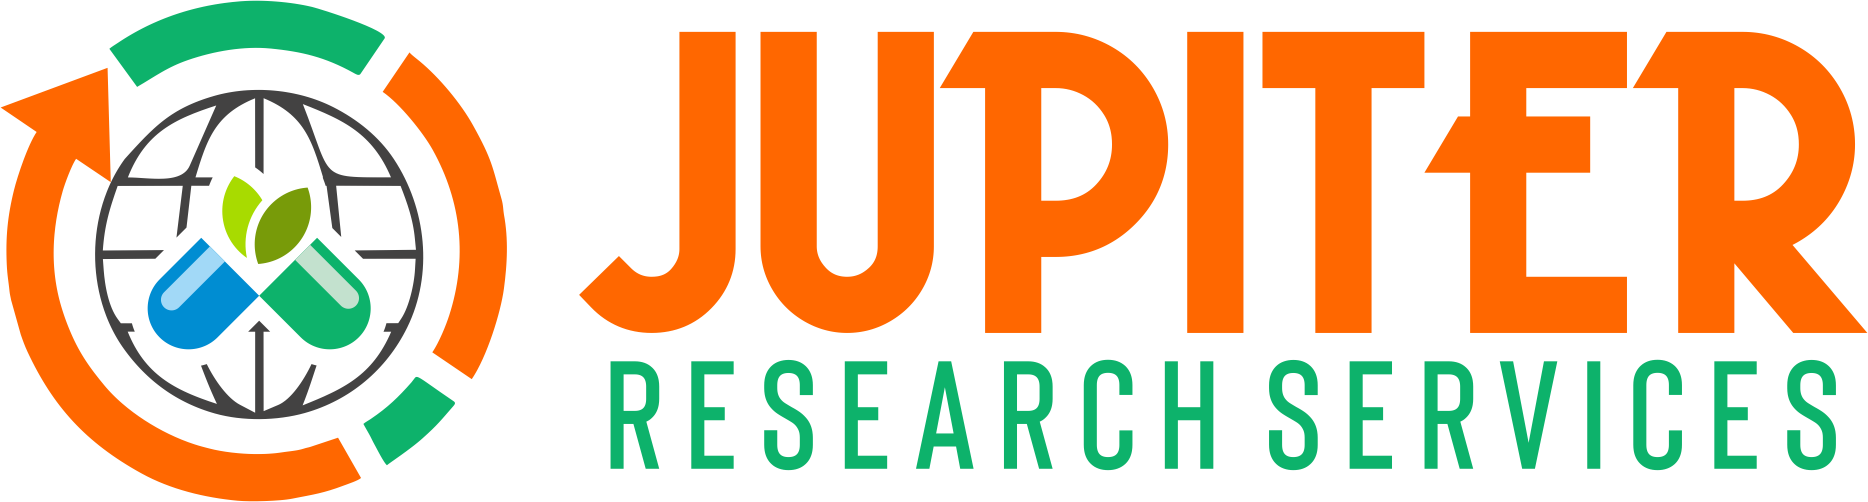 JUPITER RESEARCH SERVICES